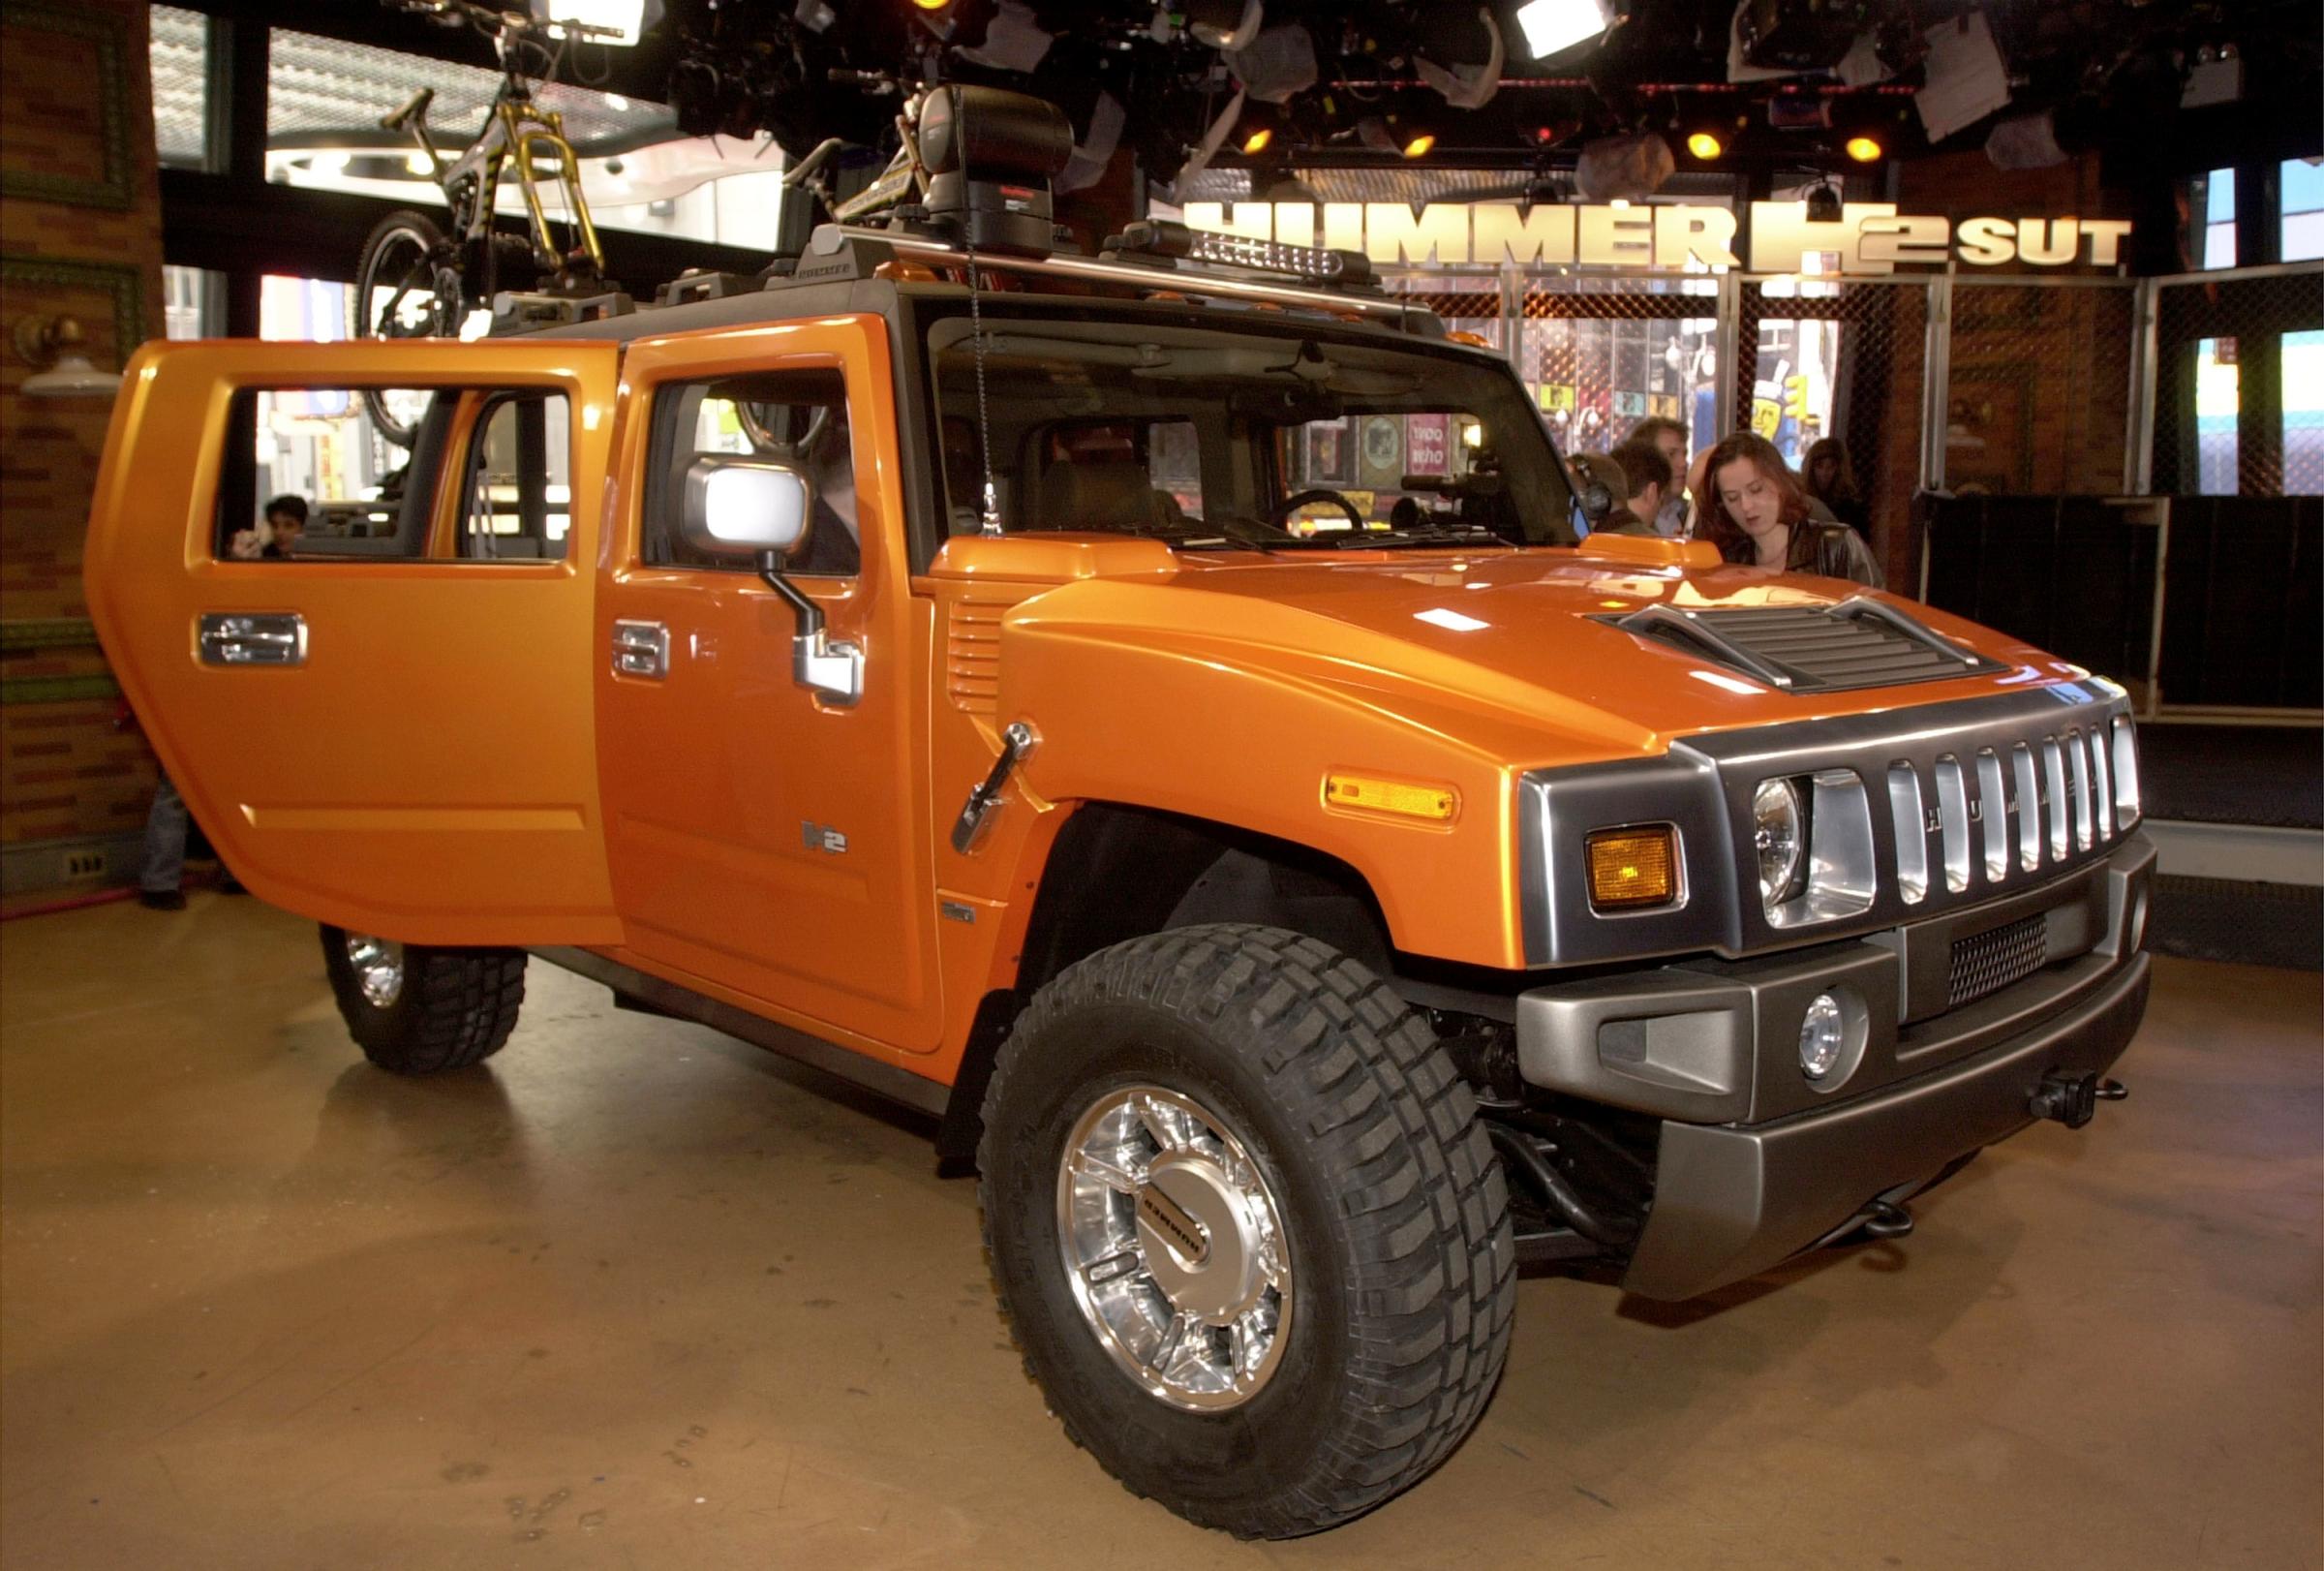 The new General Motors concept Hummer H2 sport utility truck is on display April 10, 2001 in New York City. (Photo by Spencer Platt/Newsmakers)